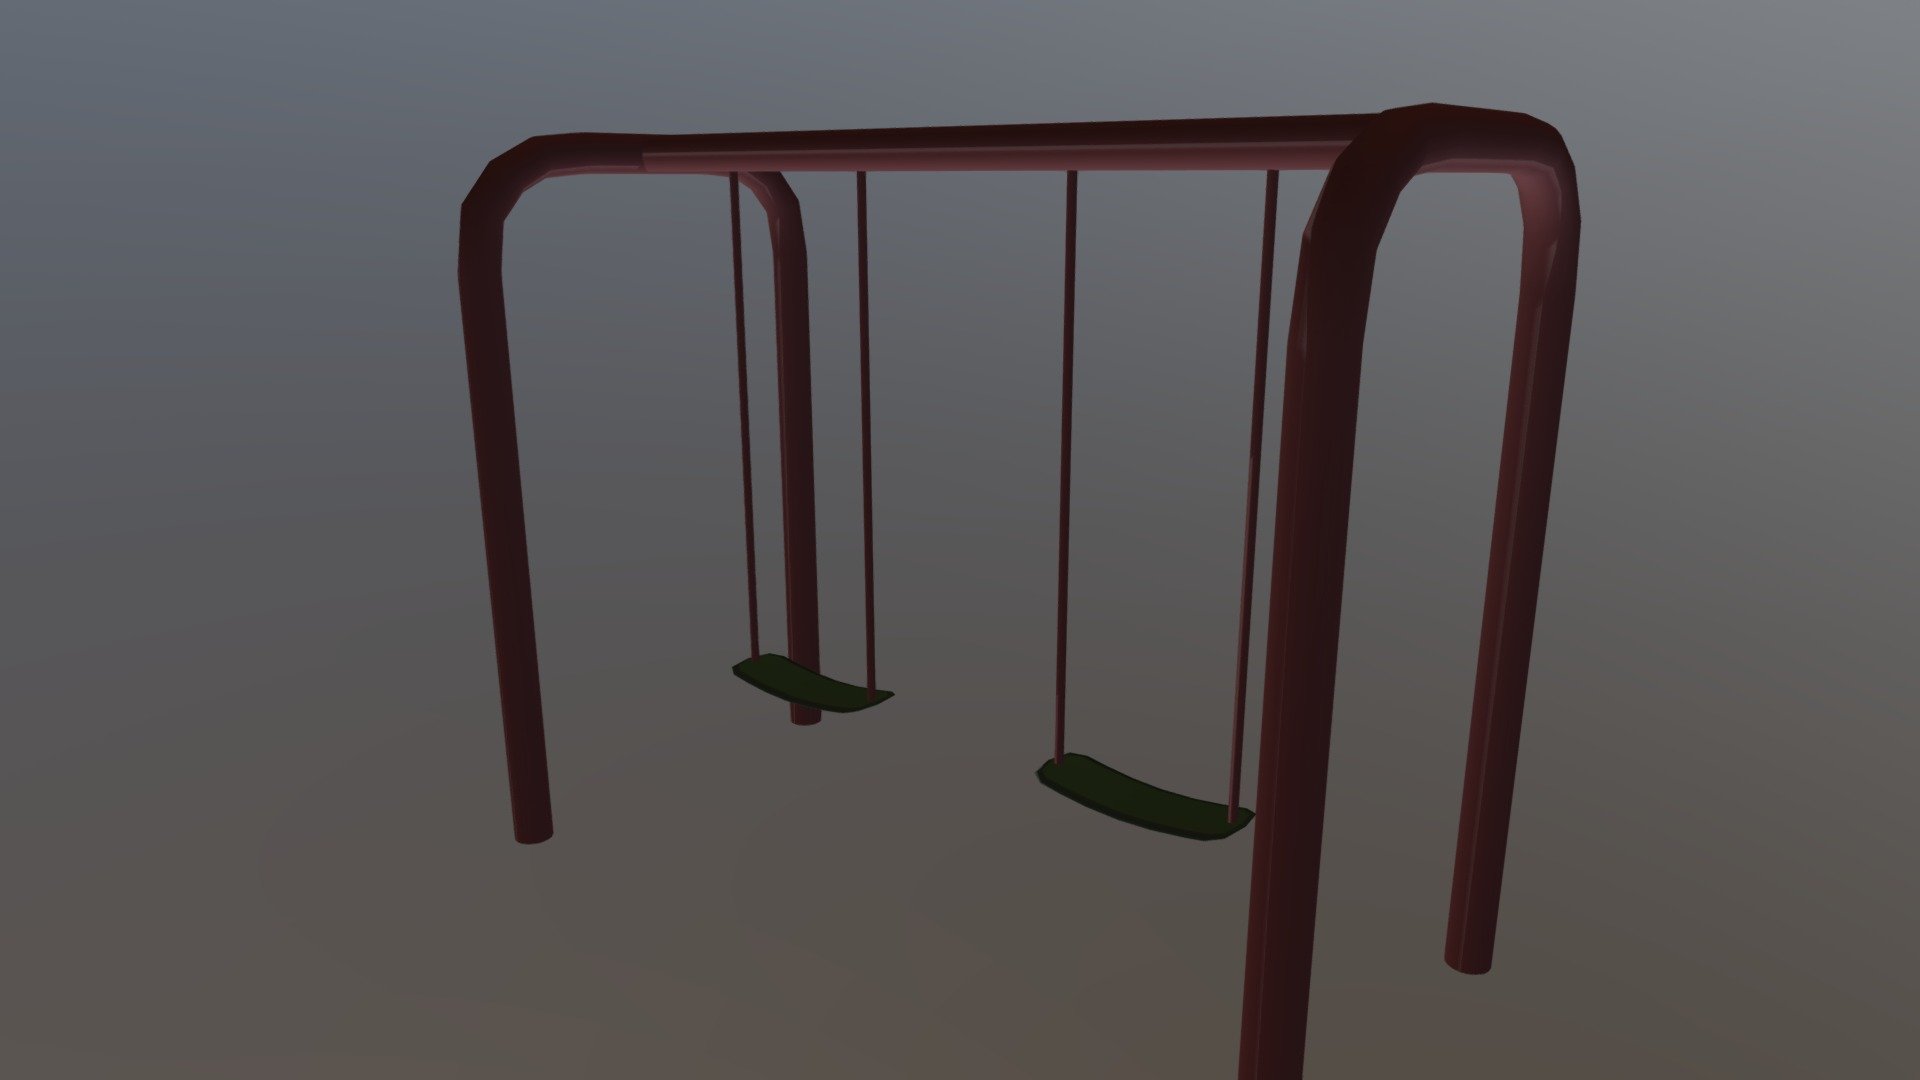 A model of a swing-set that I made for my game 3d model